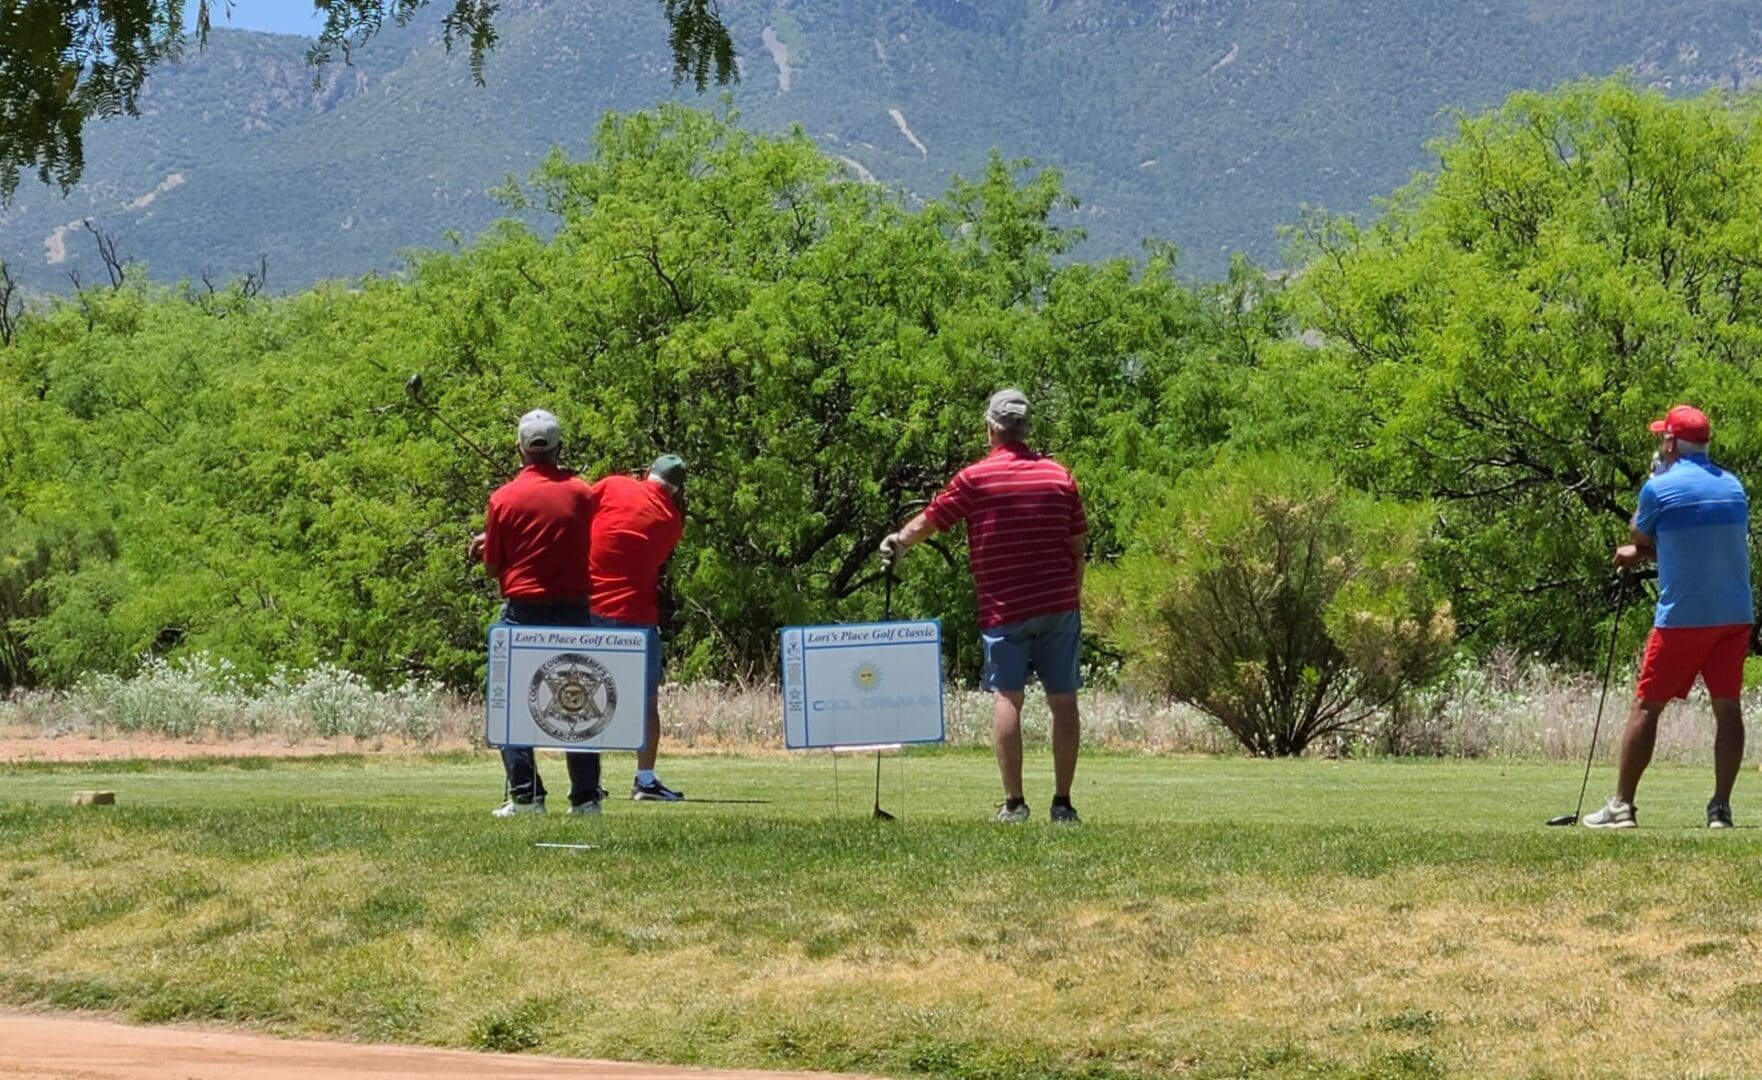 Three men are playing golf on a green.